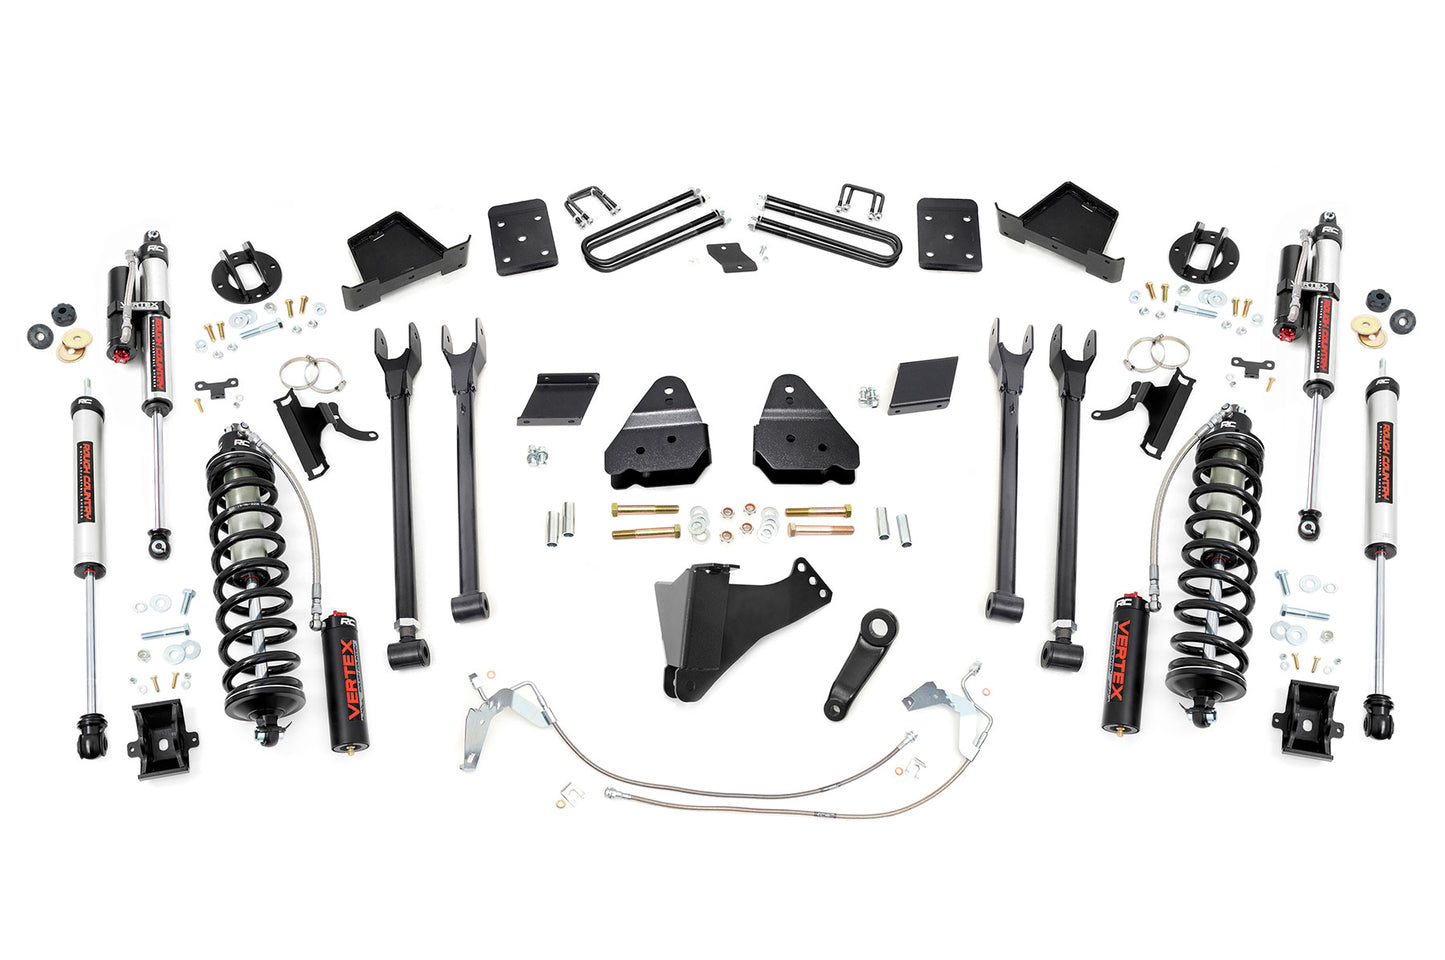 Rough Country 6 Inch Lift Kit  |  4 Link  |  OVLD  |  C/O Vertex | Ford F-250 Super Duty (15-16)